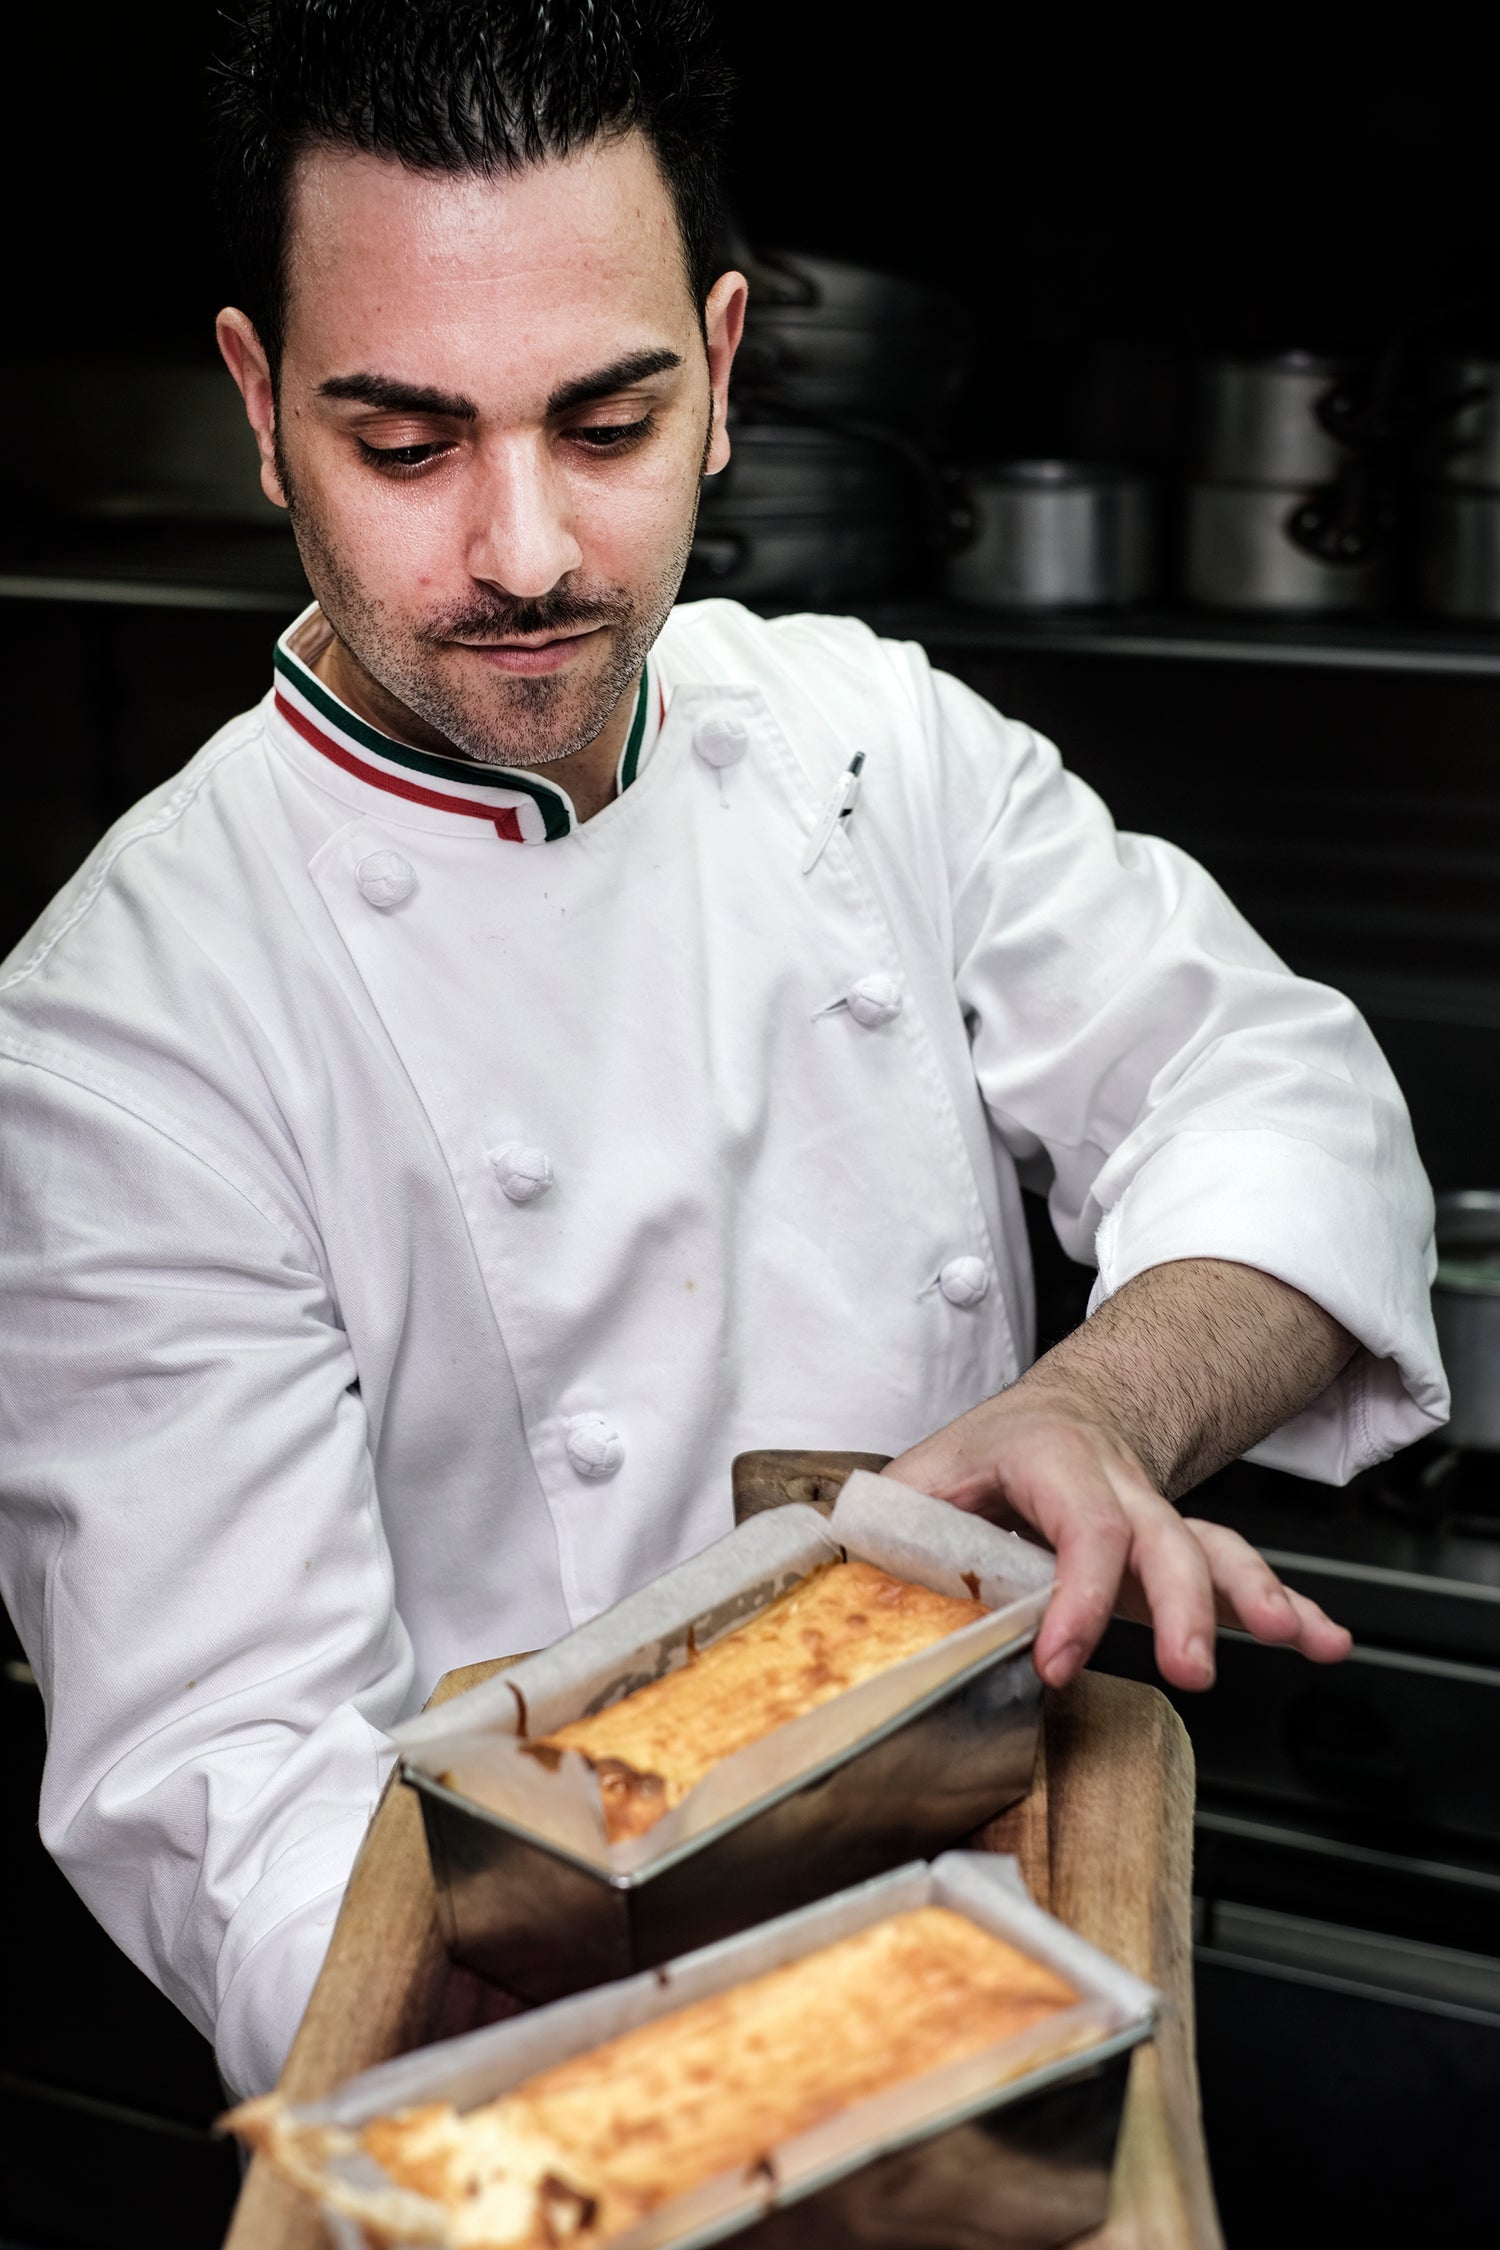 Chef Peppe with baked Ricotta Cheesecake